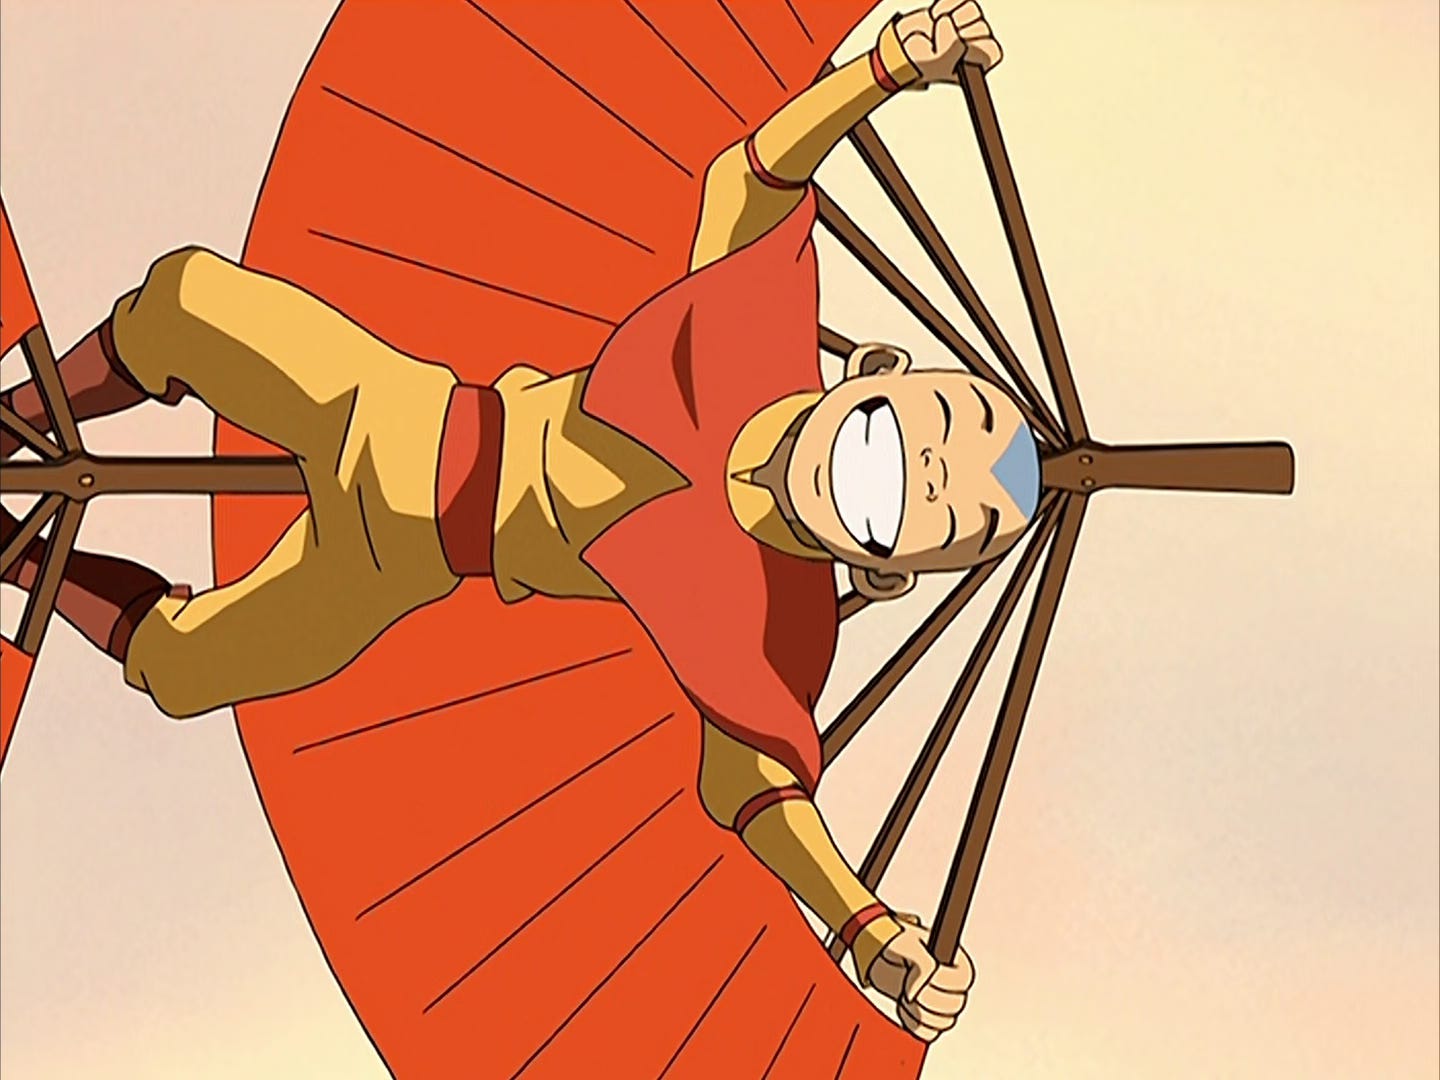 Aang flies on his glider with his eyes closed and a big smile on his face.